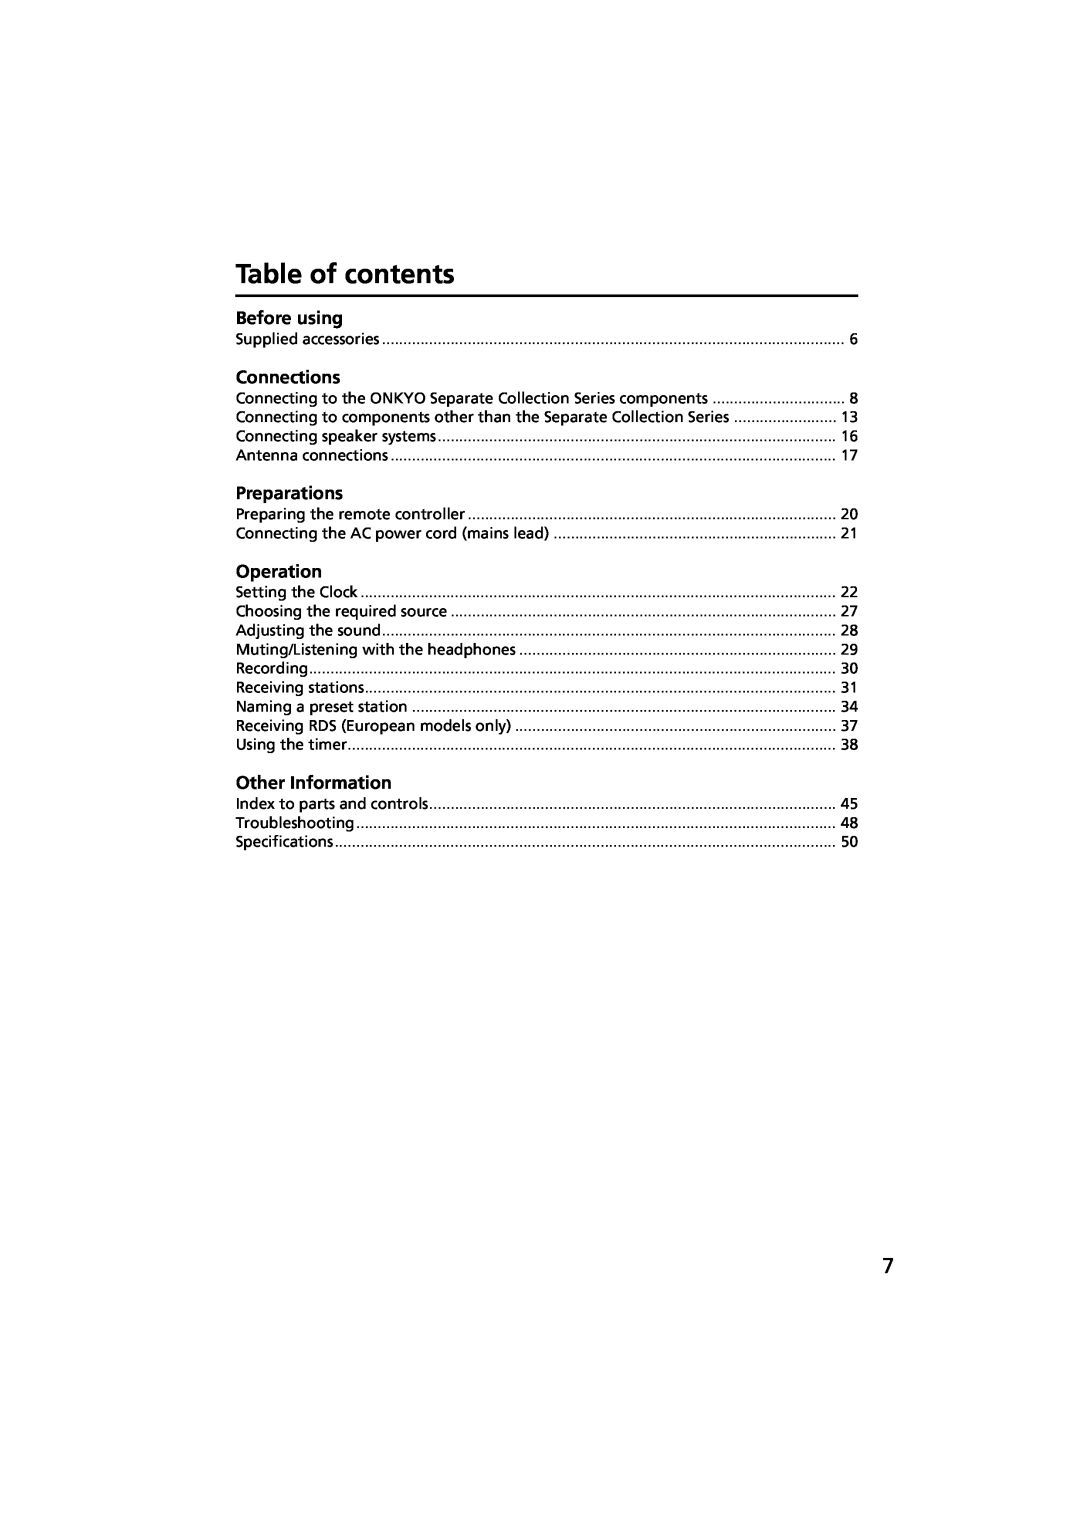 Onkyo R-801A instruction manual Table of contents, Before using, Connections, Preparations, Operation, Other Information 